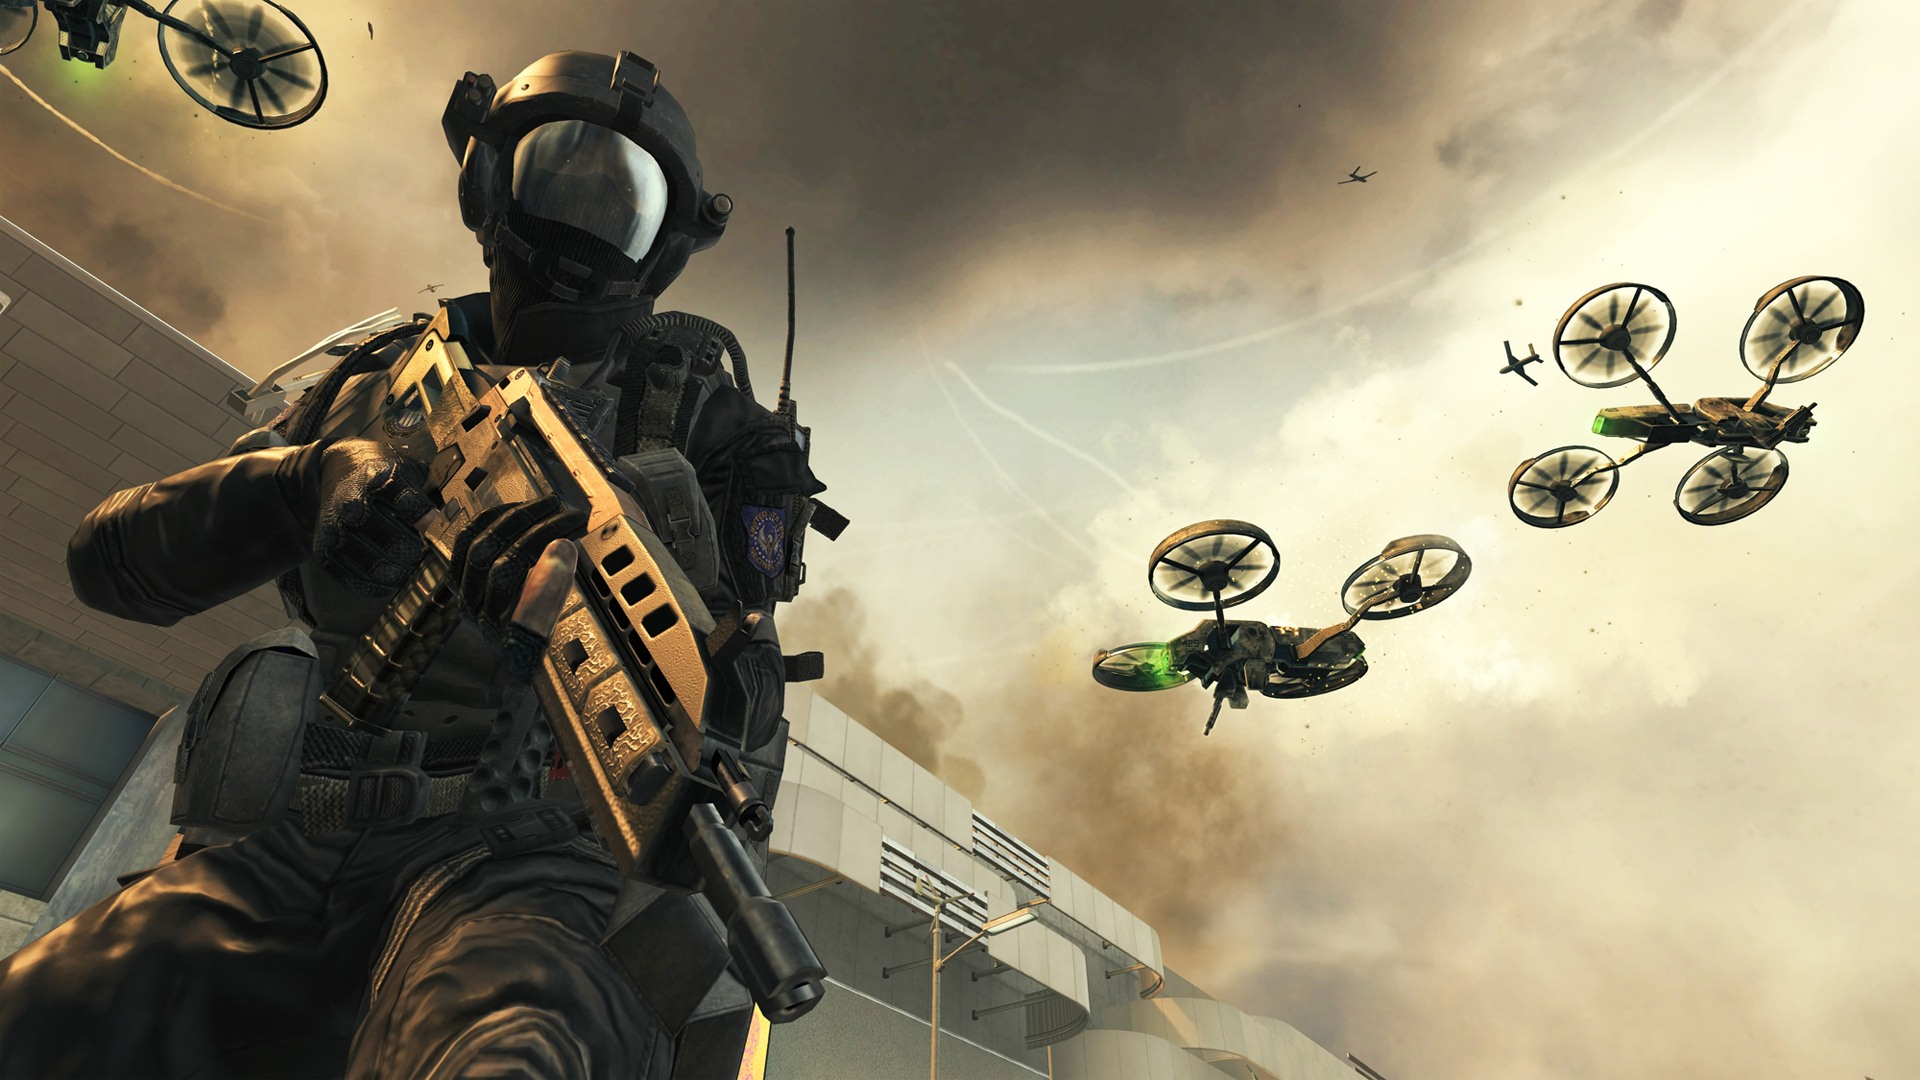 Call of Duty: Black Ops 2 HD wallpapers #9 - 1920x1080